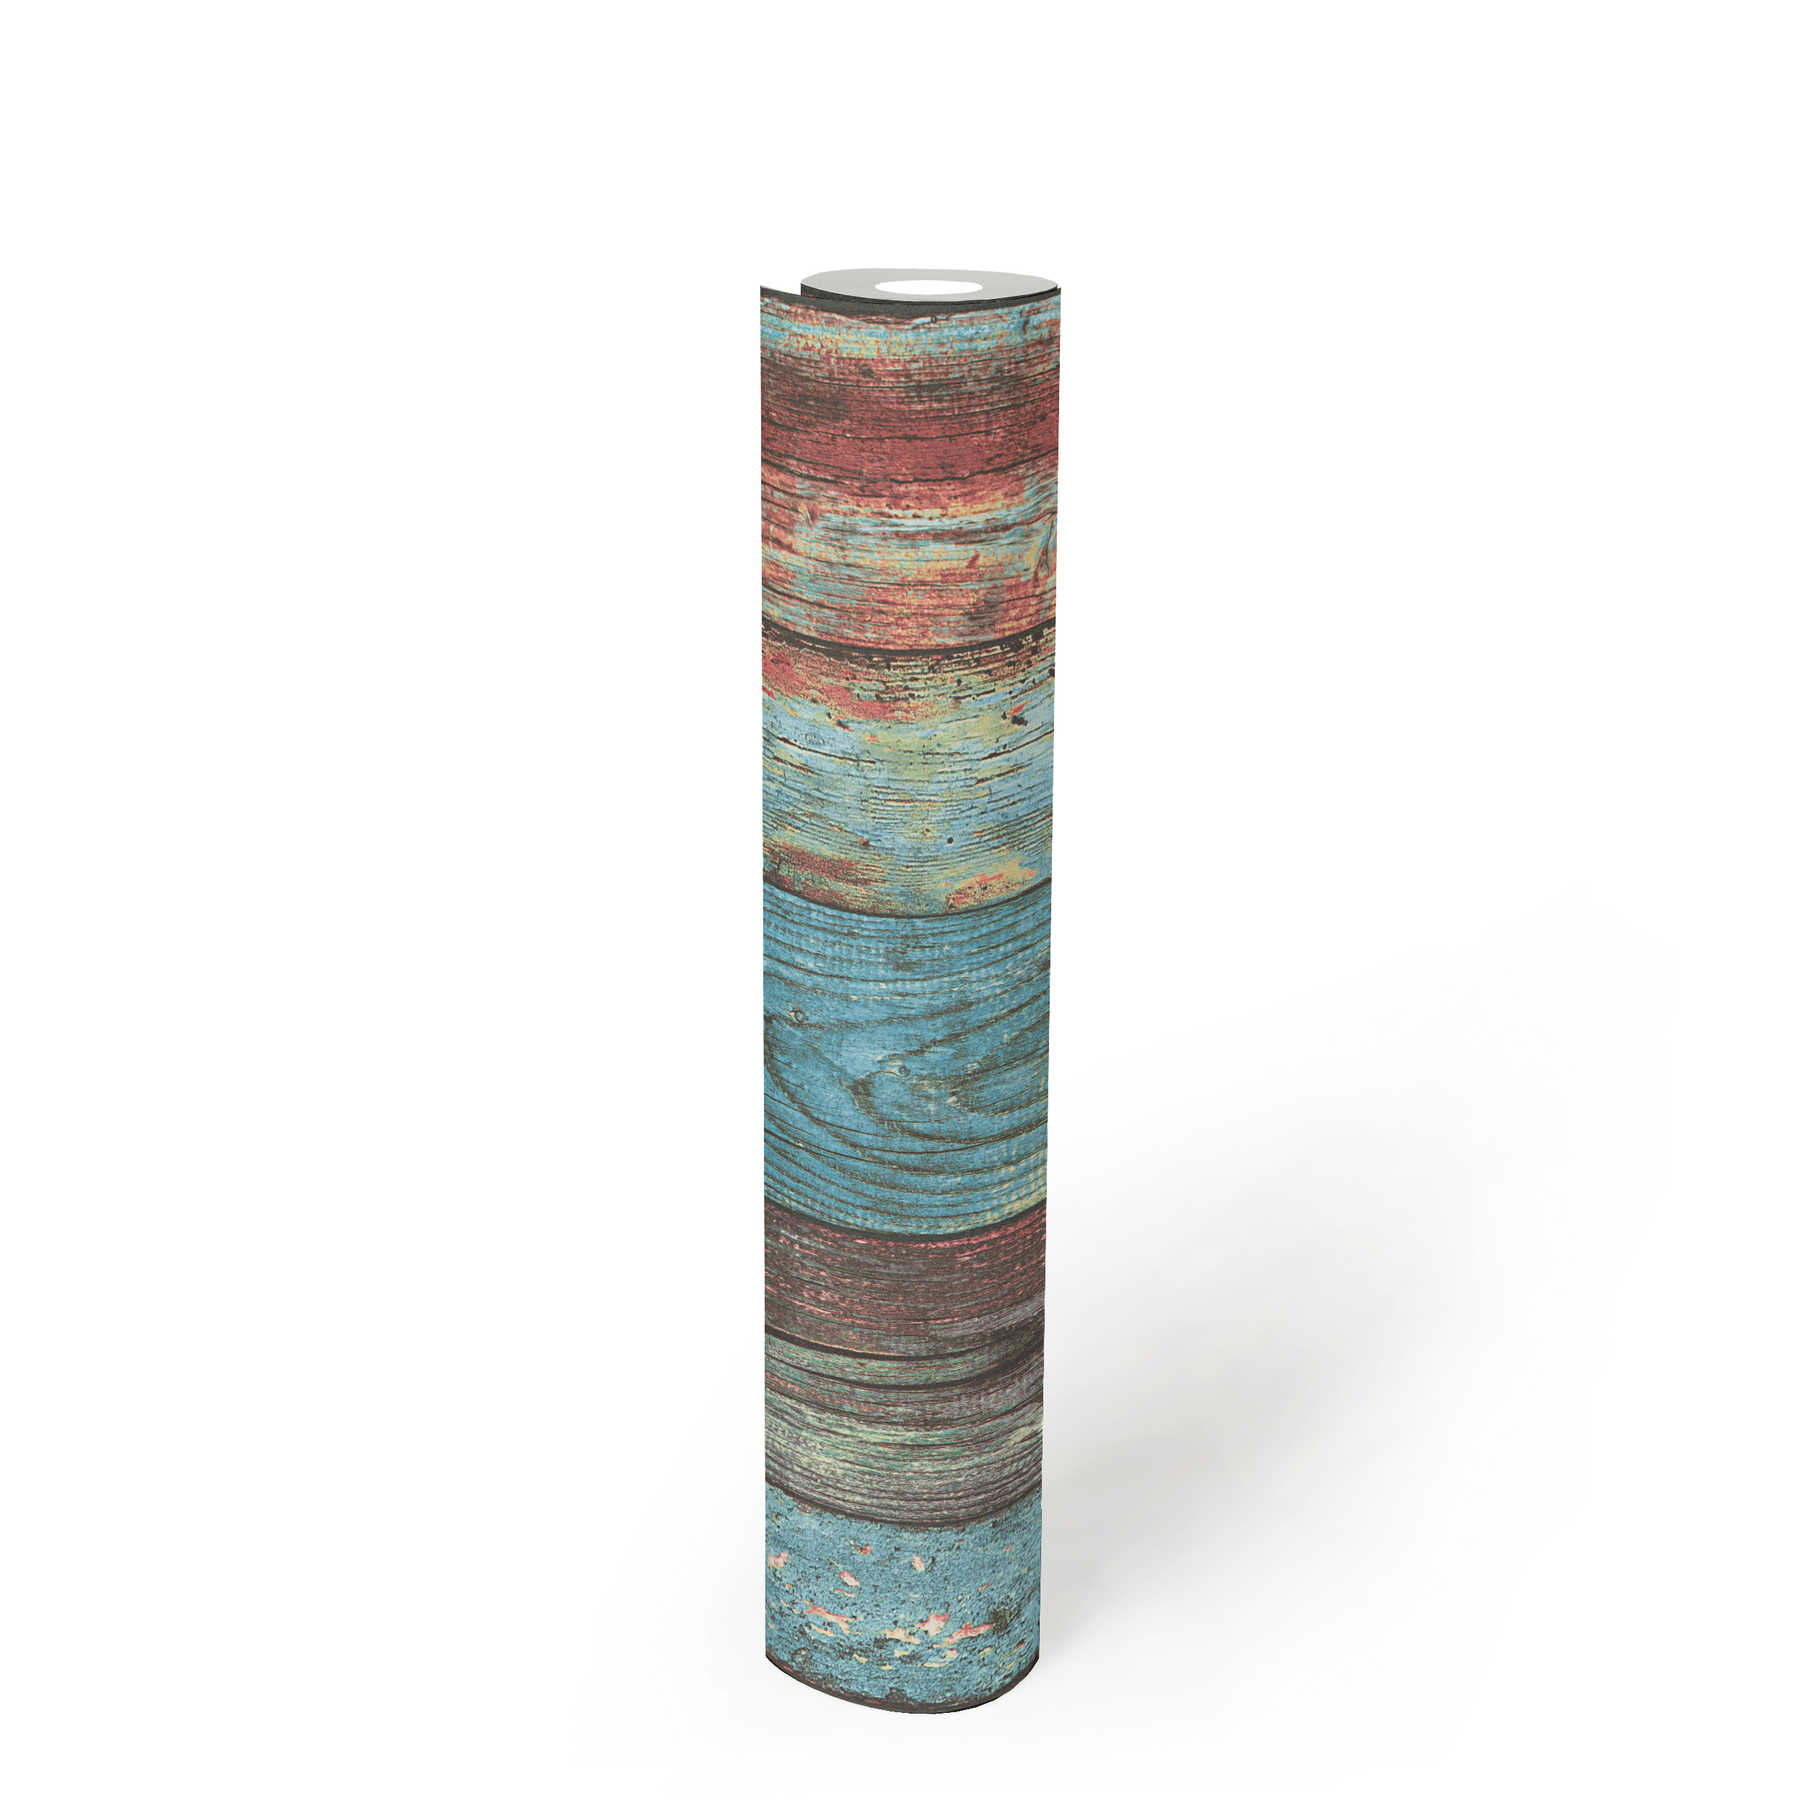             Colorful wood wallpaper Shabby Chic Style with boards pattern - Blue, Red, Brown
        